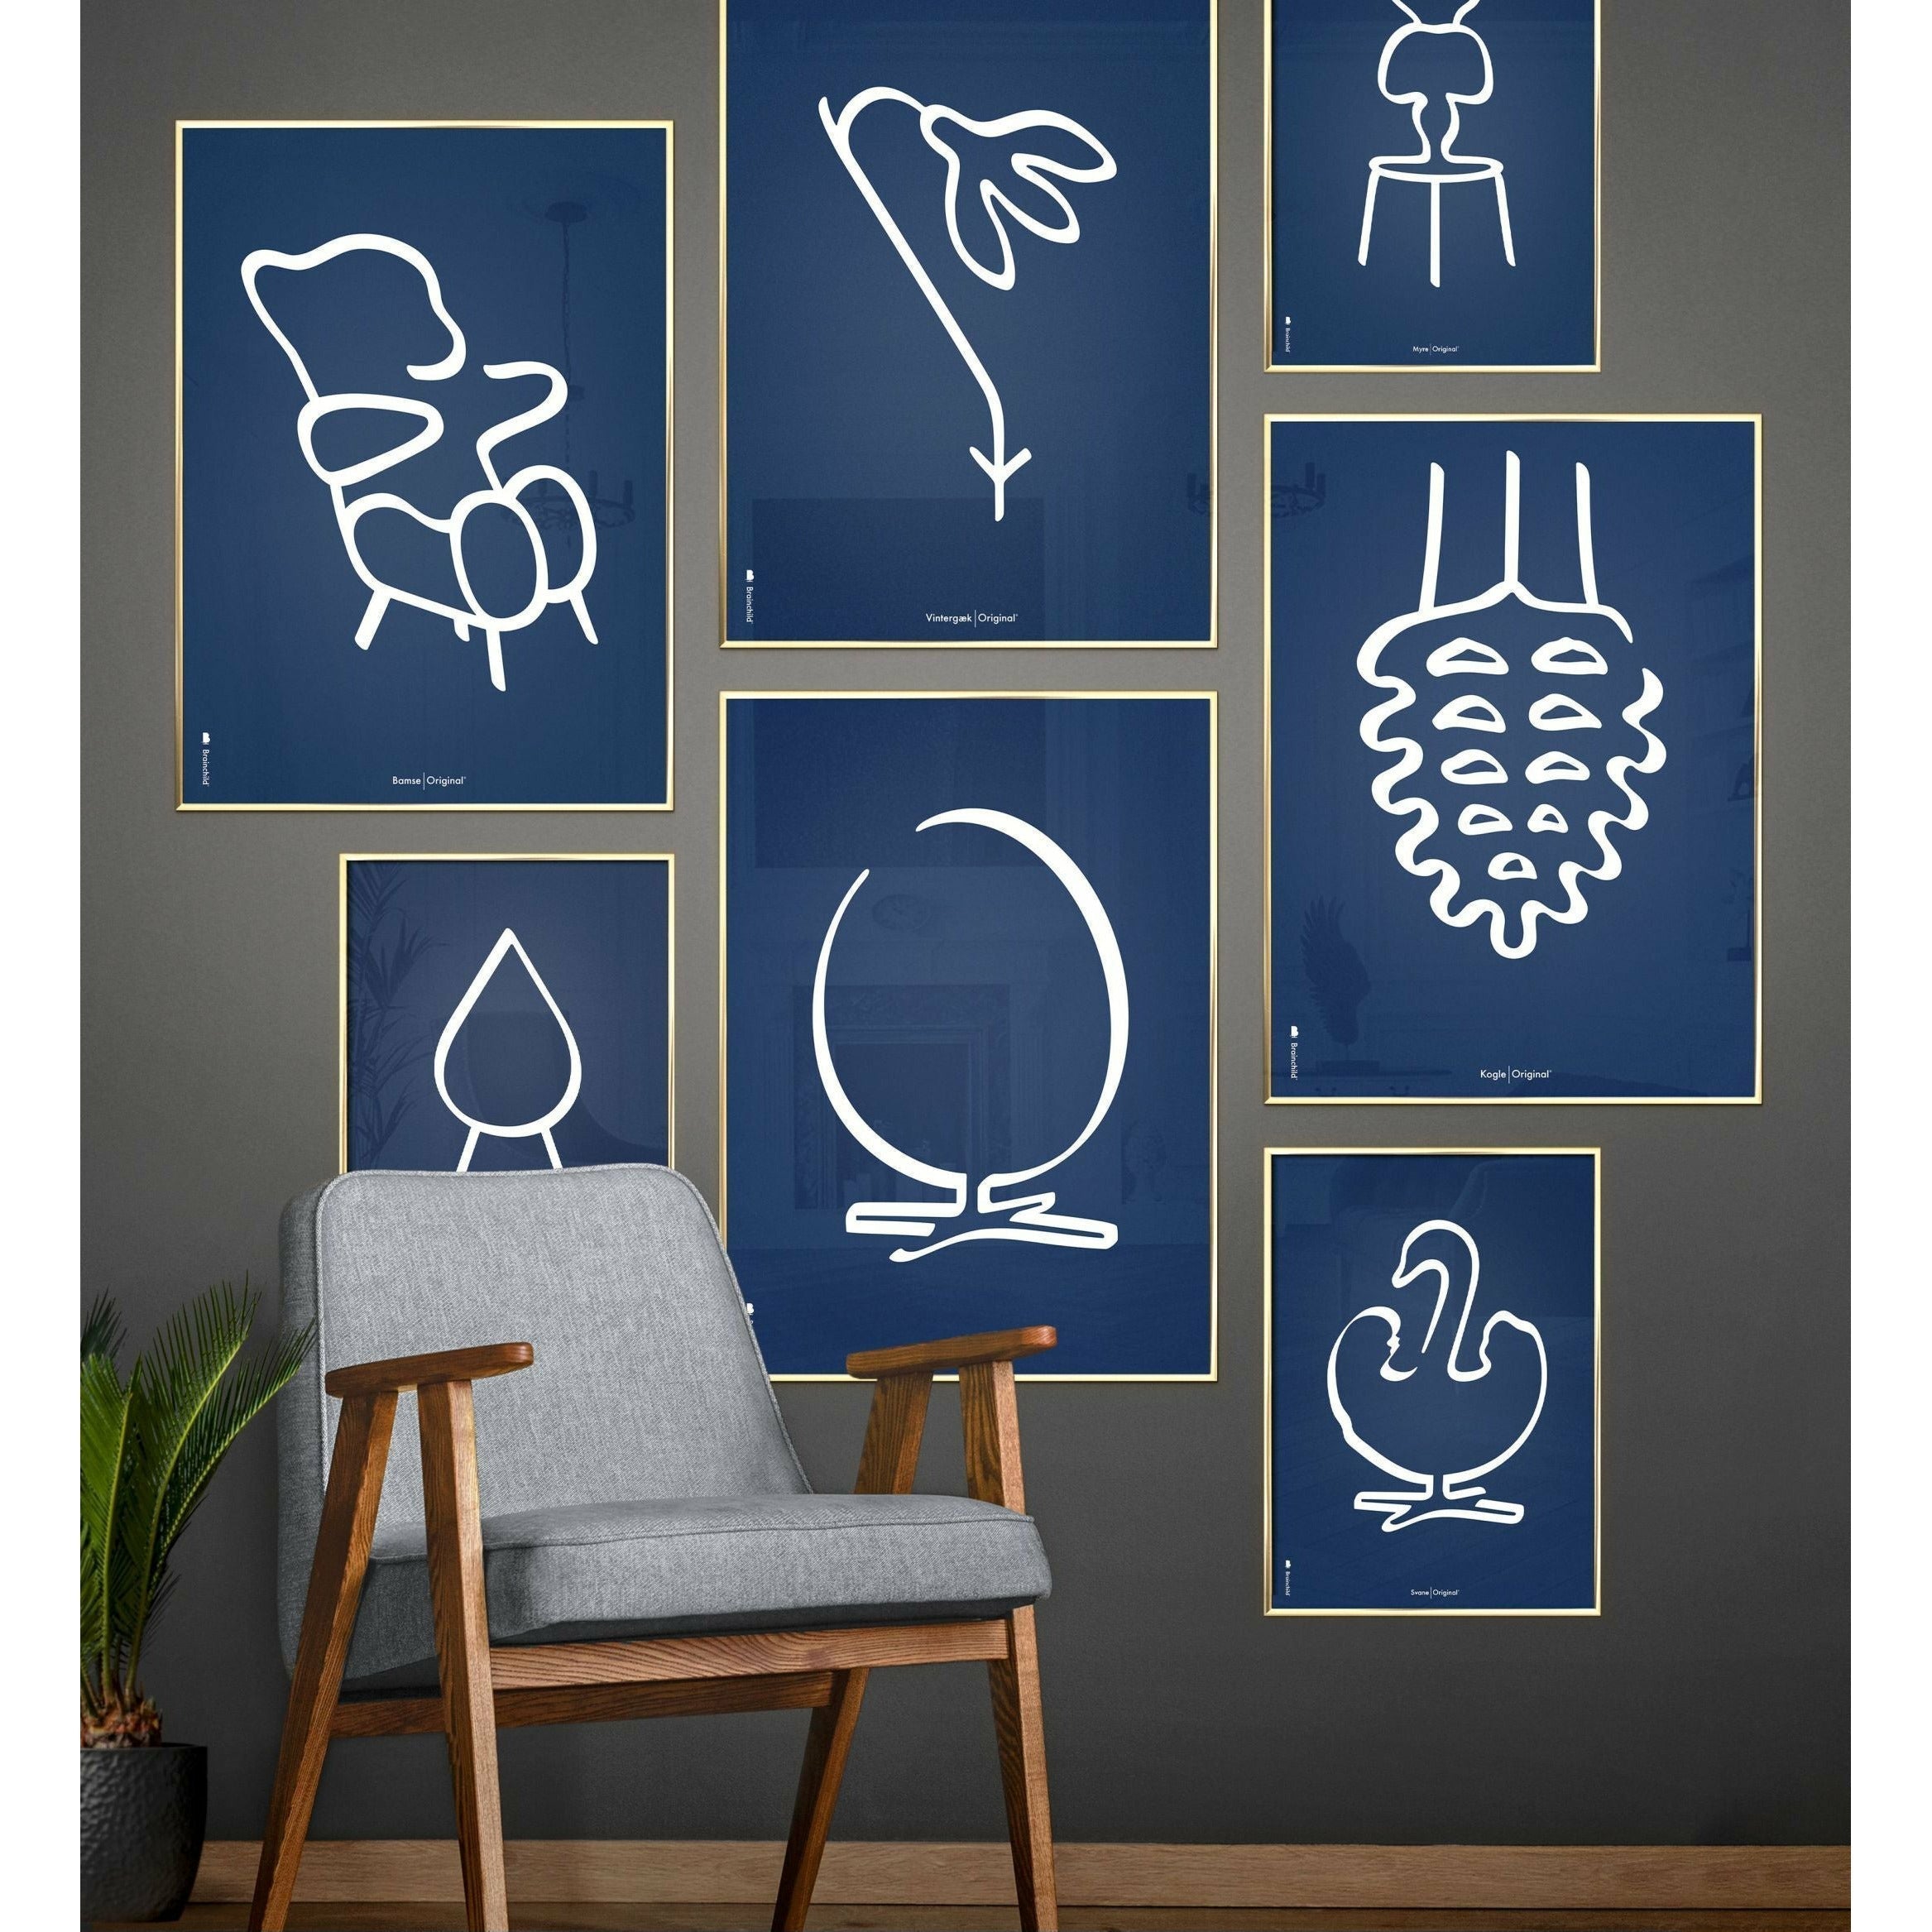 Brainchild Pine Cone Line Poster, Frame In Black Lacquered Wood A5, Blue Background